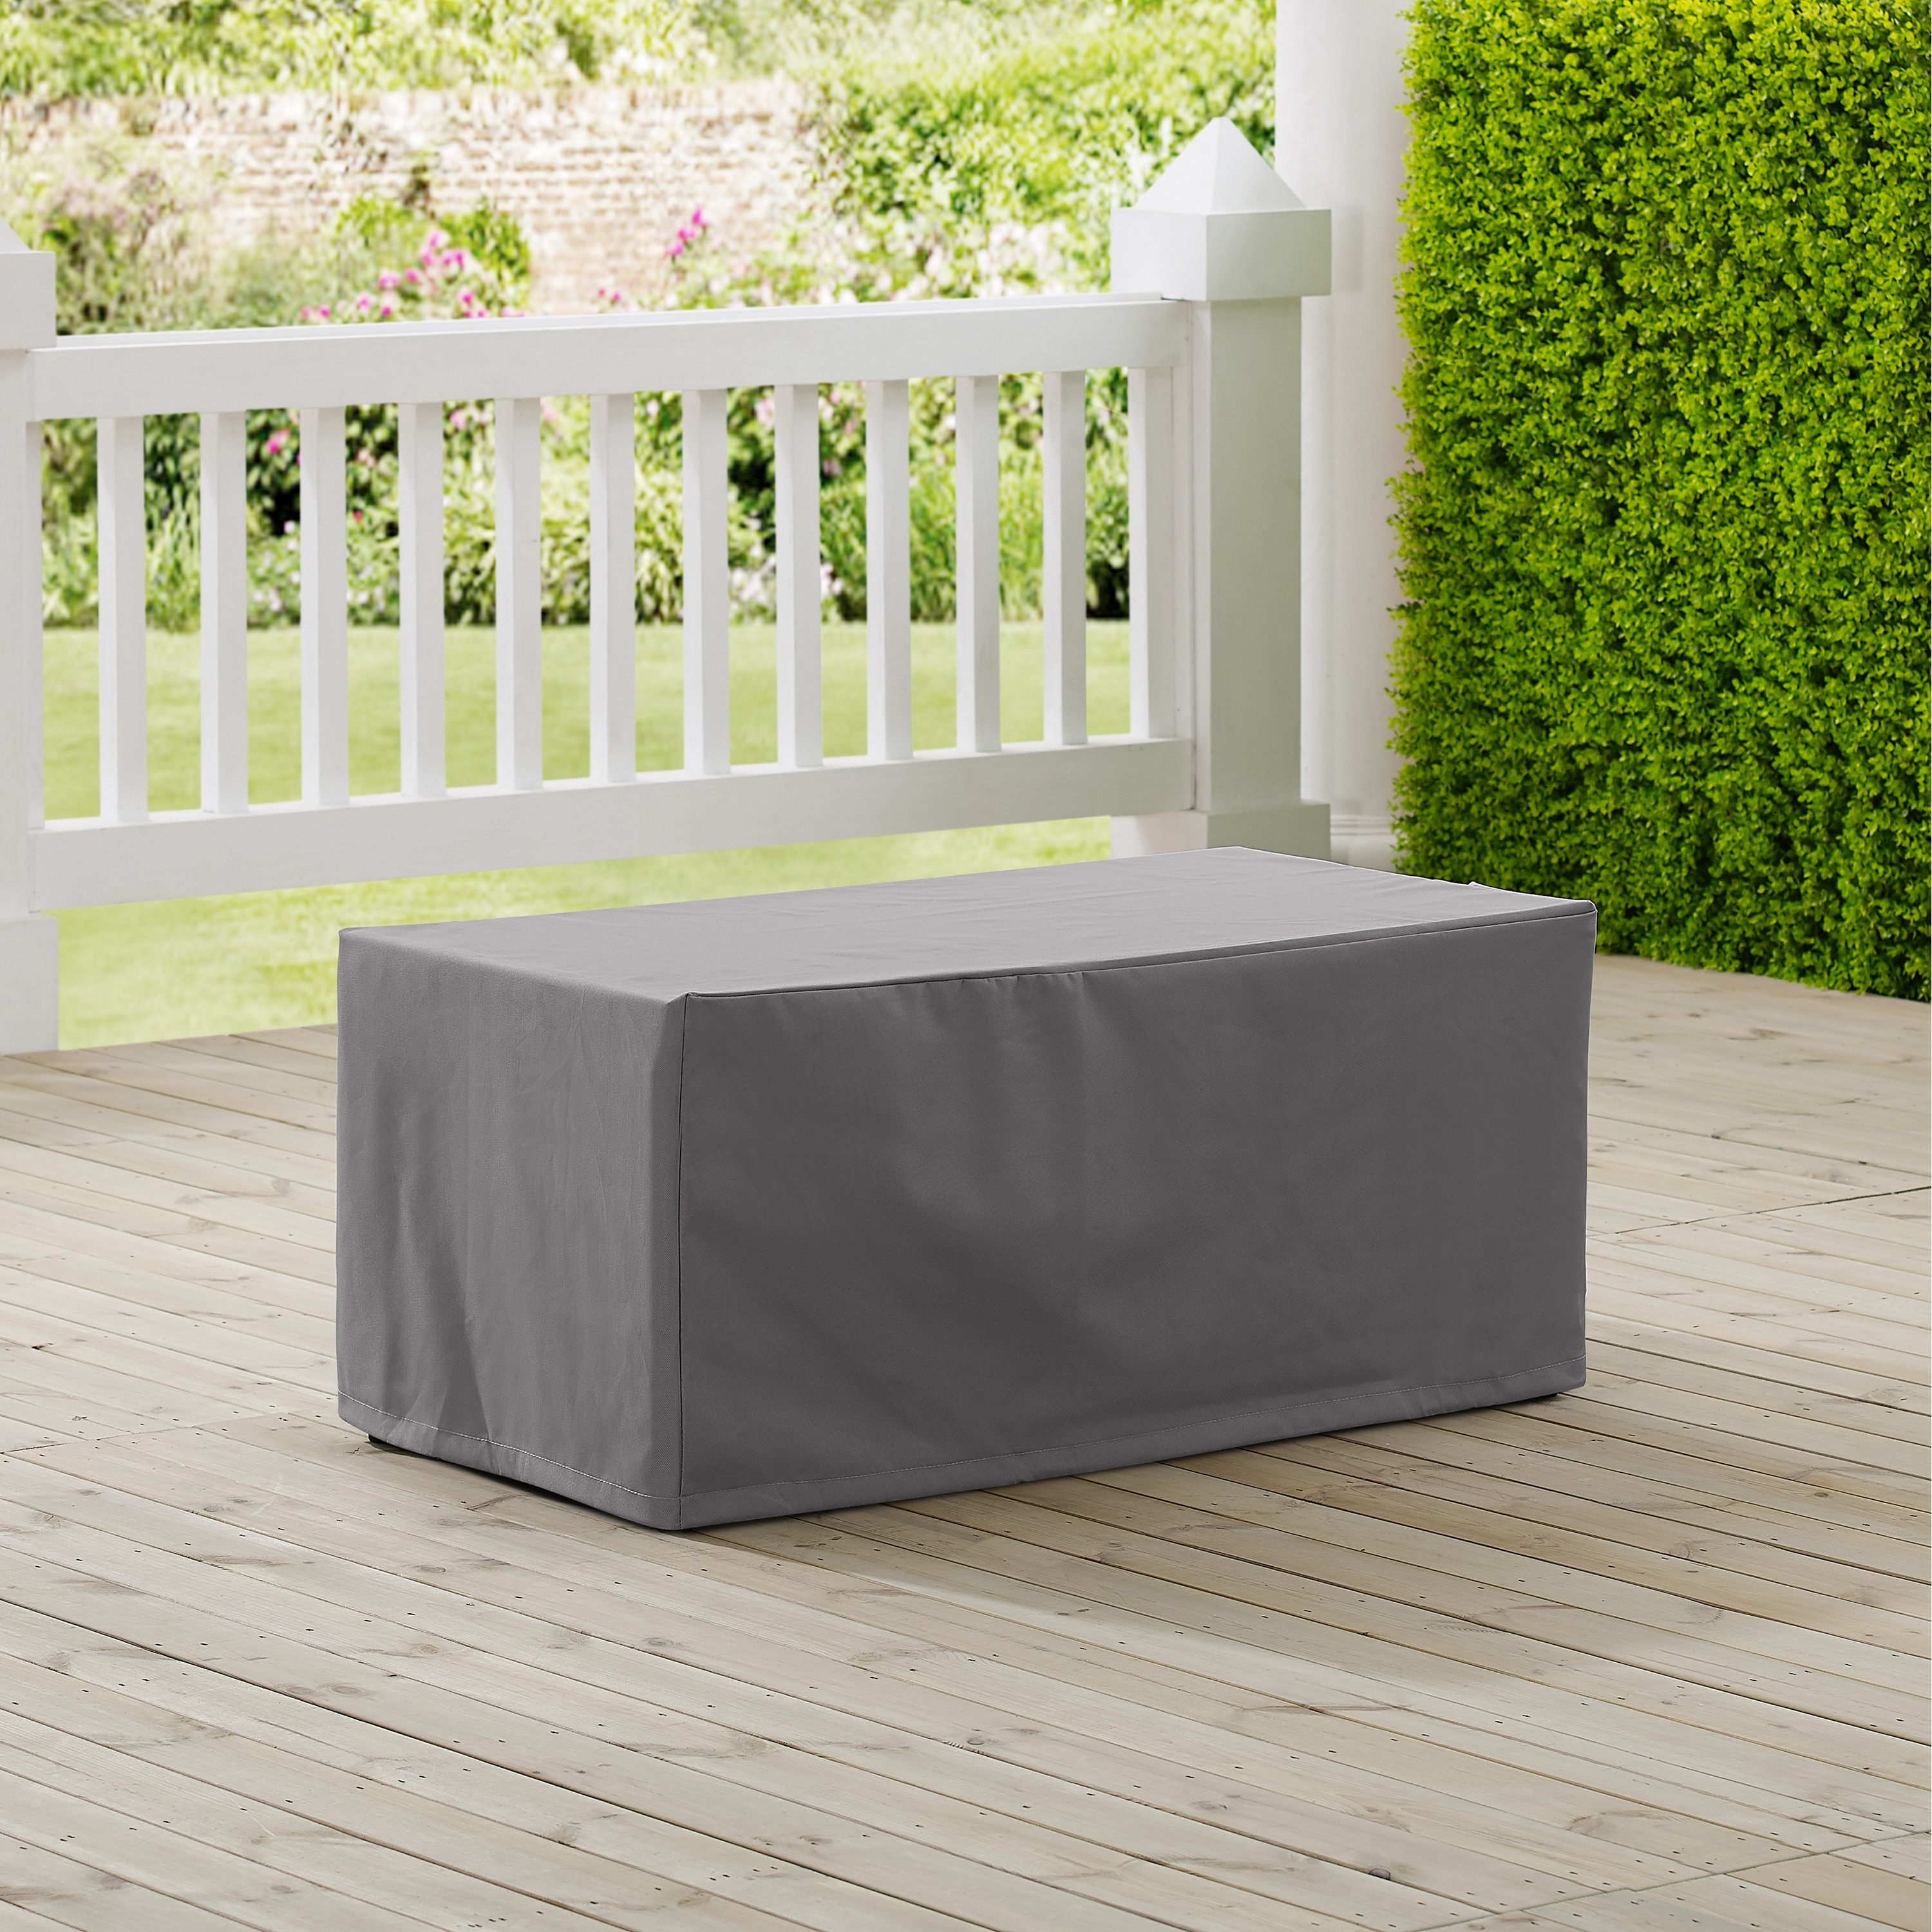 Outdoor Rectangular Table Furniture Cover 48 W X	36.5 D X 14 H